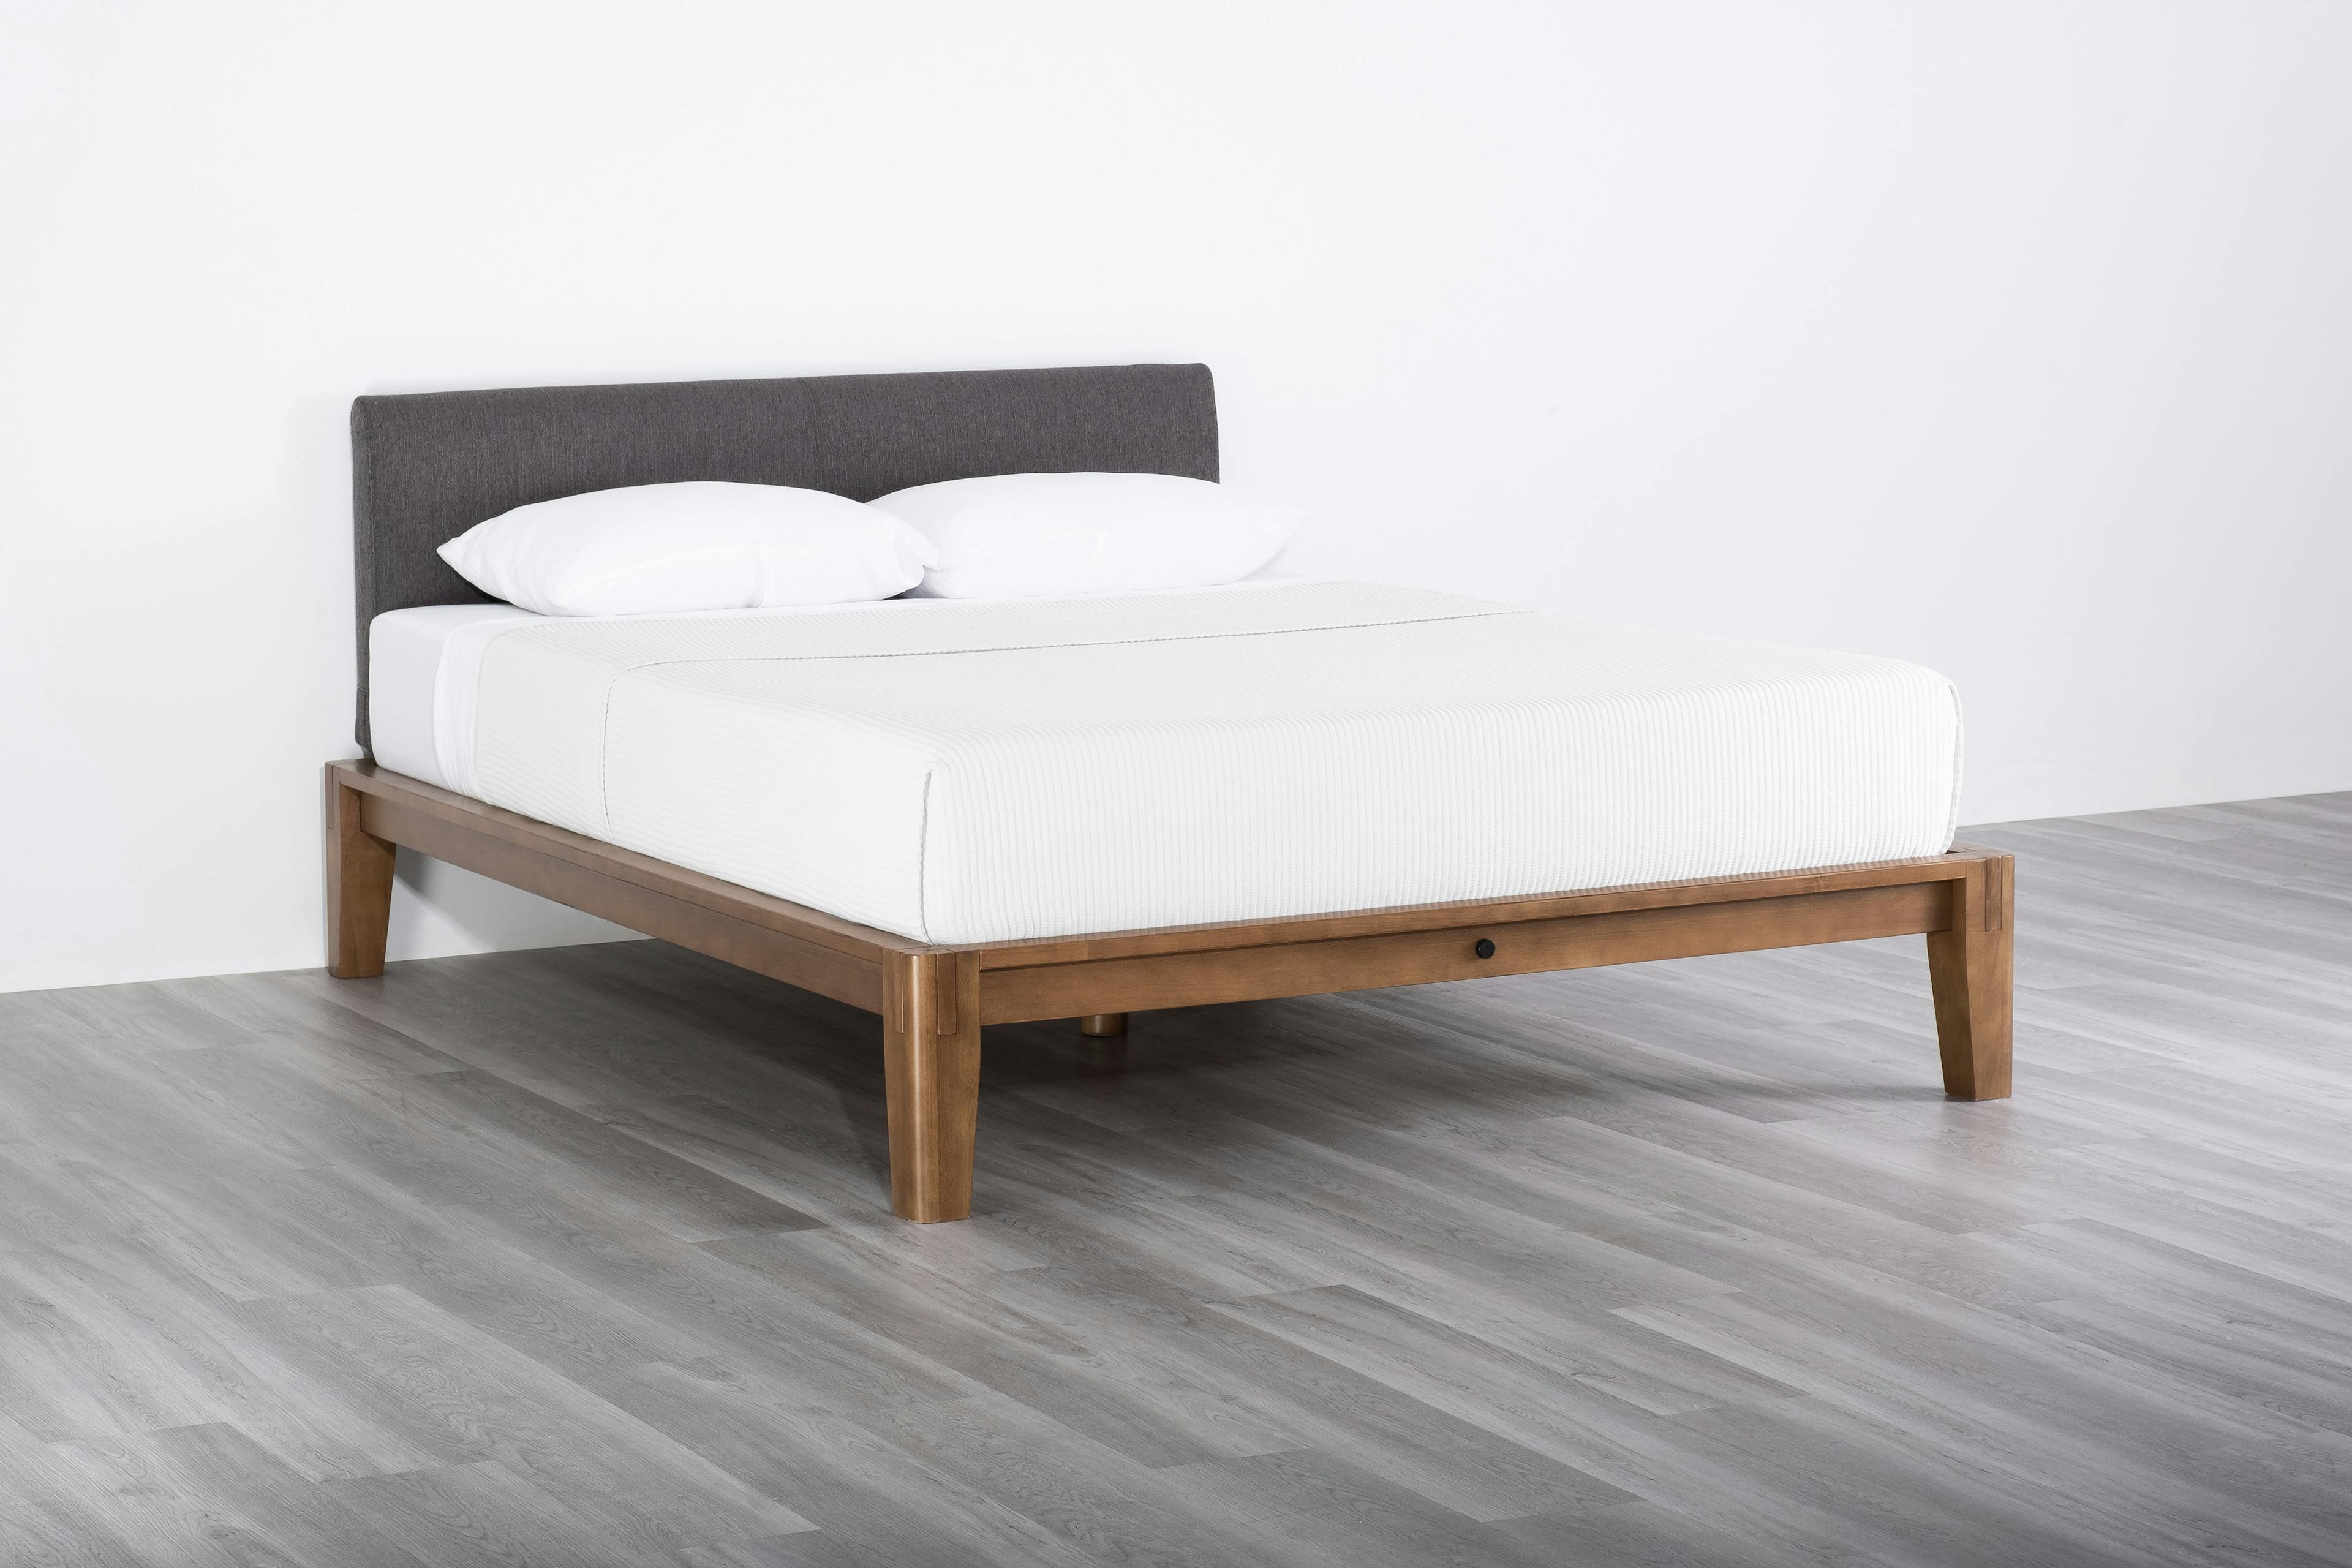 The Bed in Walnut and Dark Charcoal Color, Angled View